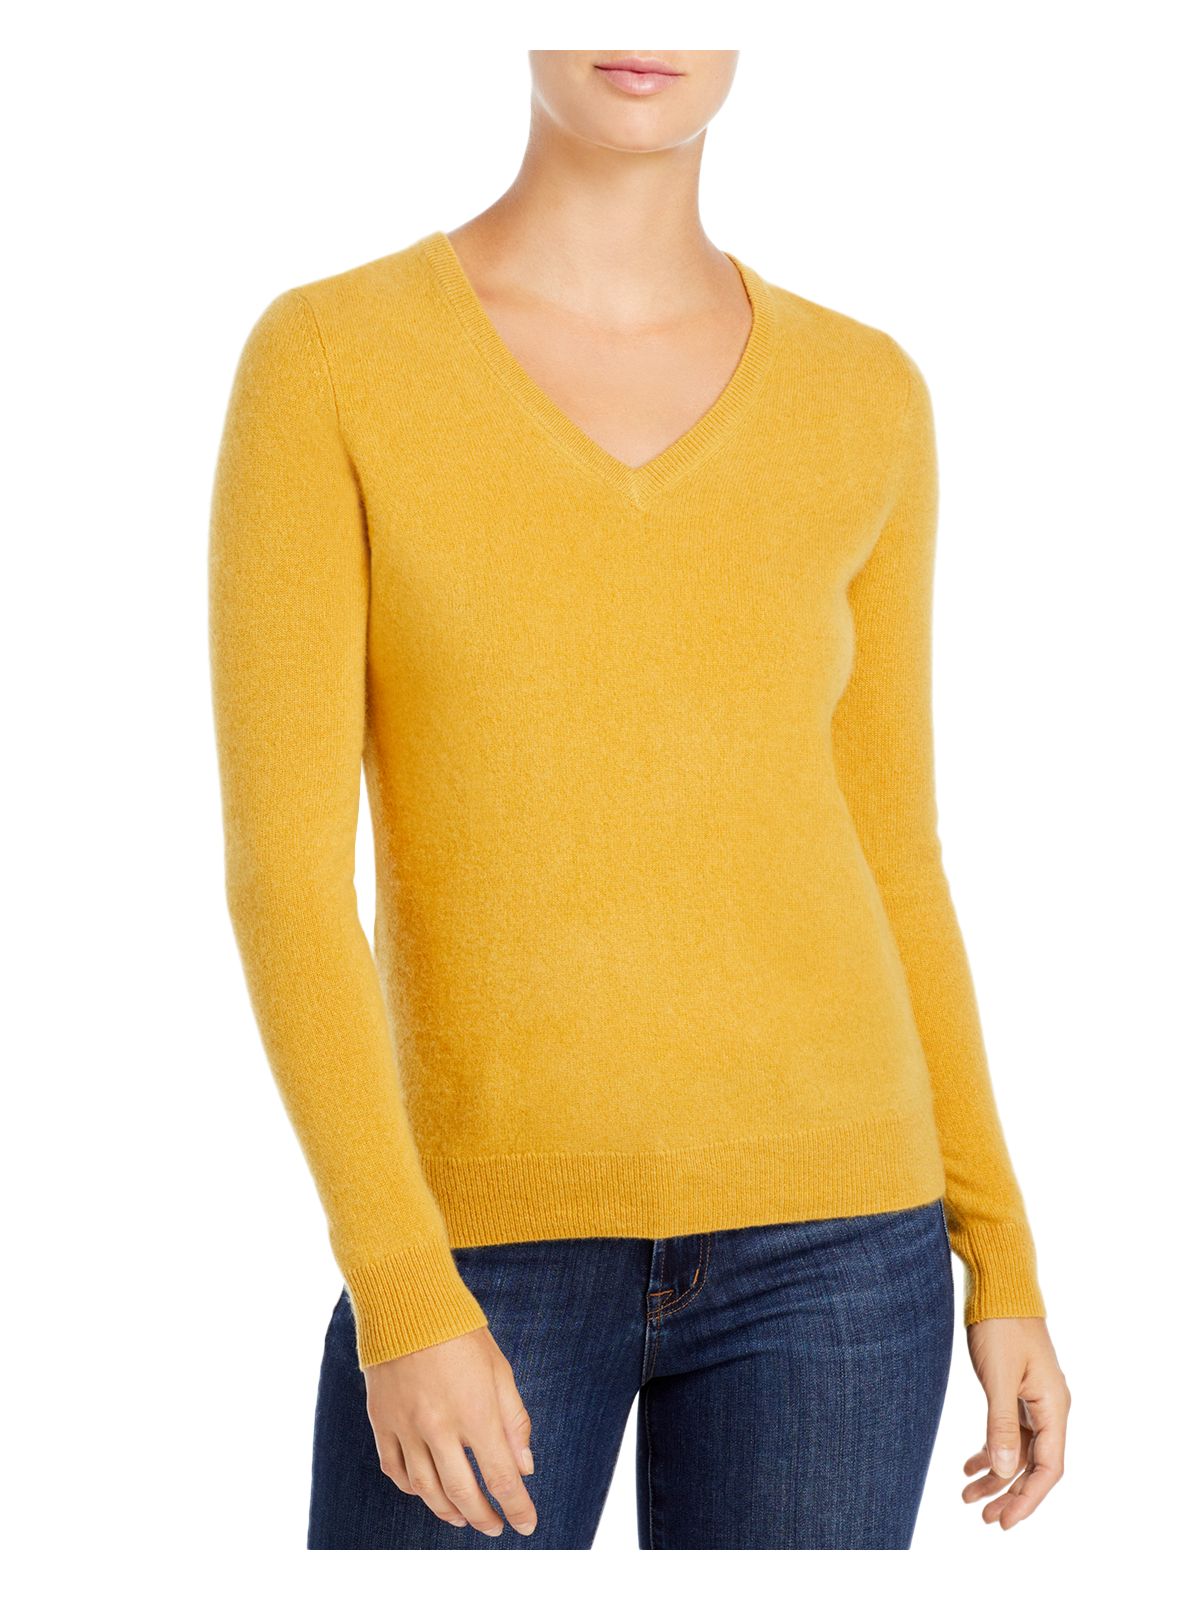 Designer Brand Womens Cashmere Ribbed Rib-knit Trim Long Sleeve V Neck Wear To Work Sweater